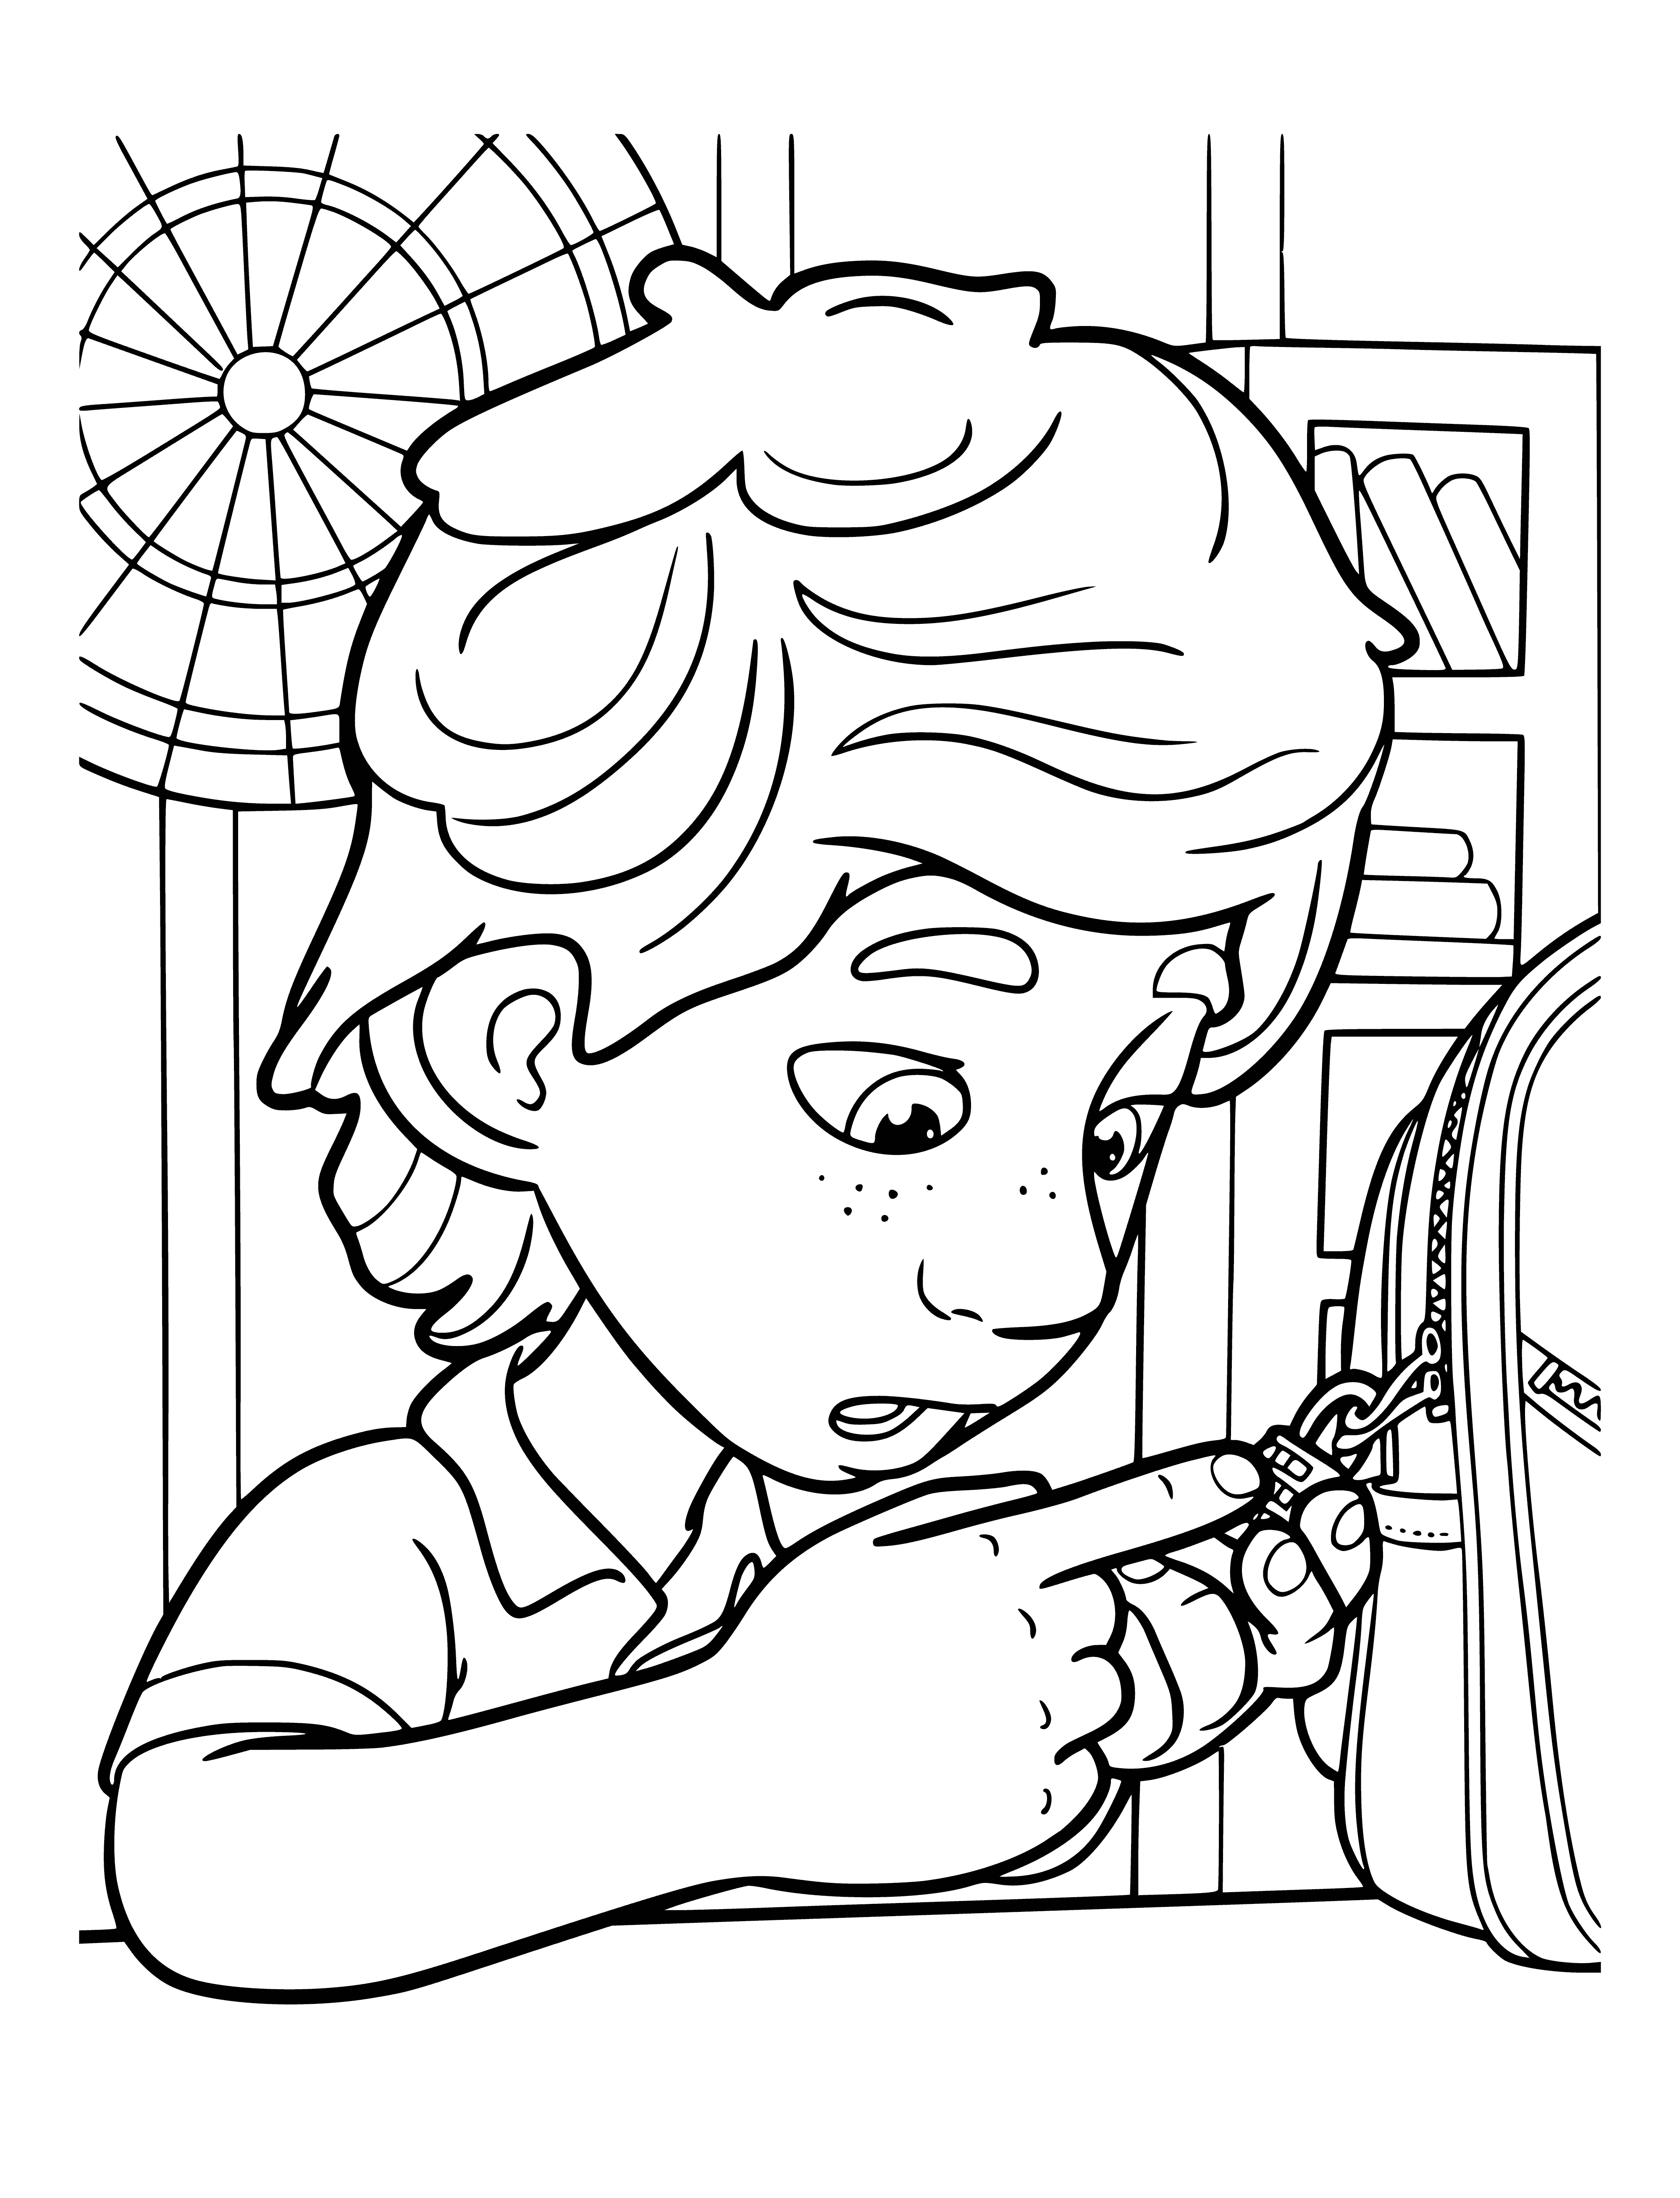 coloring page: Boy Dim Dimych sits on a stool, holding a car and a Fixie with a screwdriver stands in front of him. Blue shirt, brown hair. #fixies